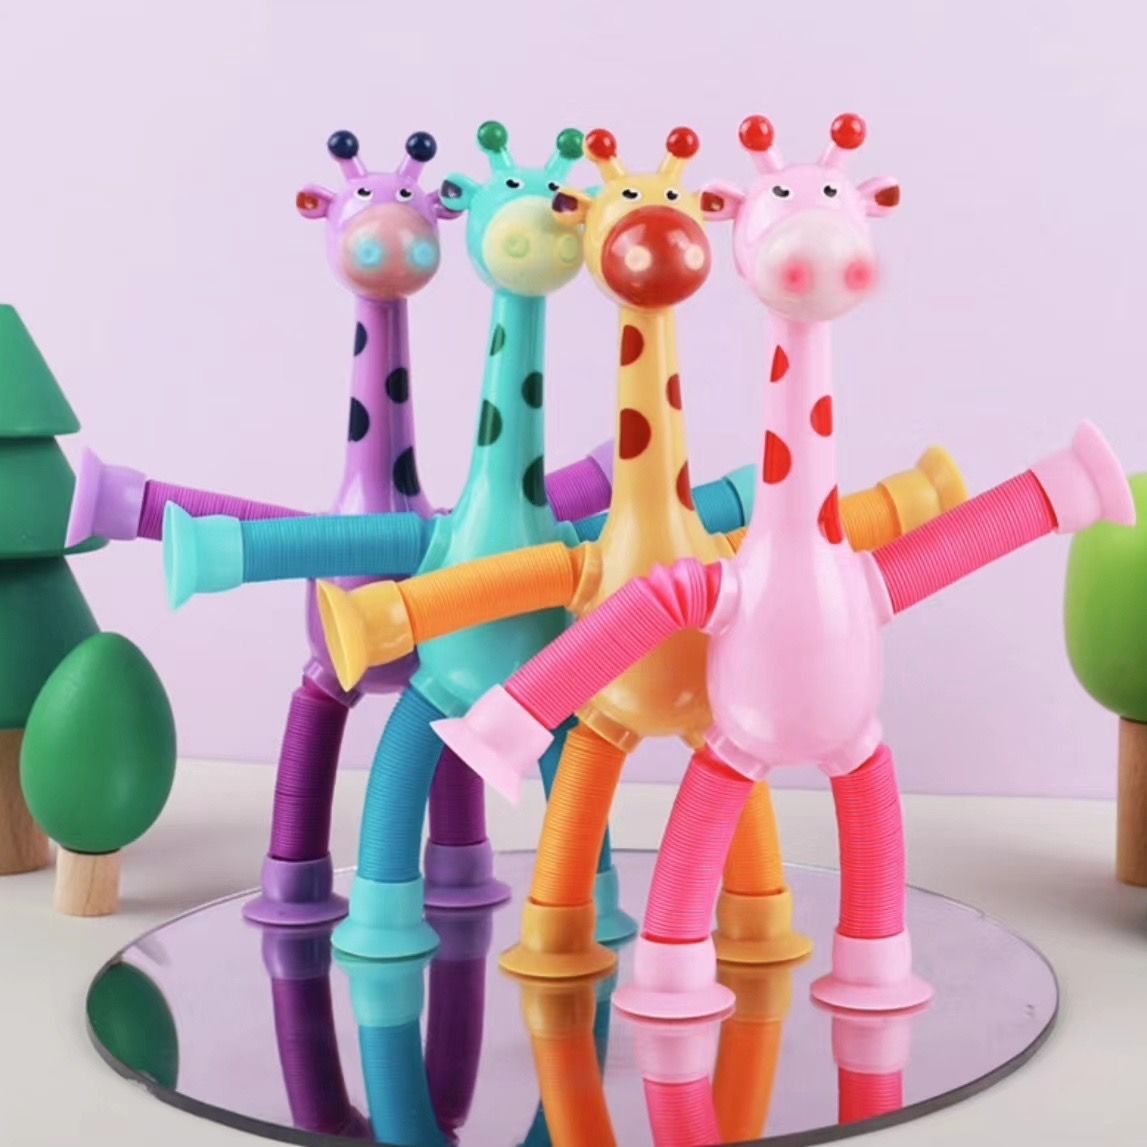 Stretch tube giraffe ever-changing luminous creative cartoon telescopic suction cup parent-child interactive children's educational decompression toy